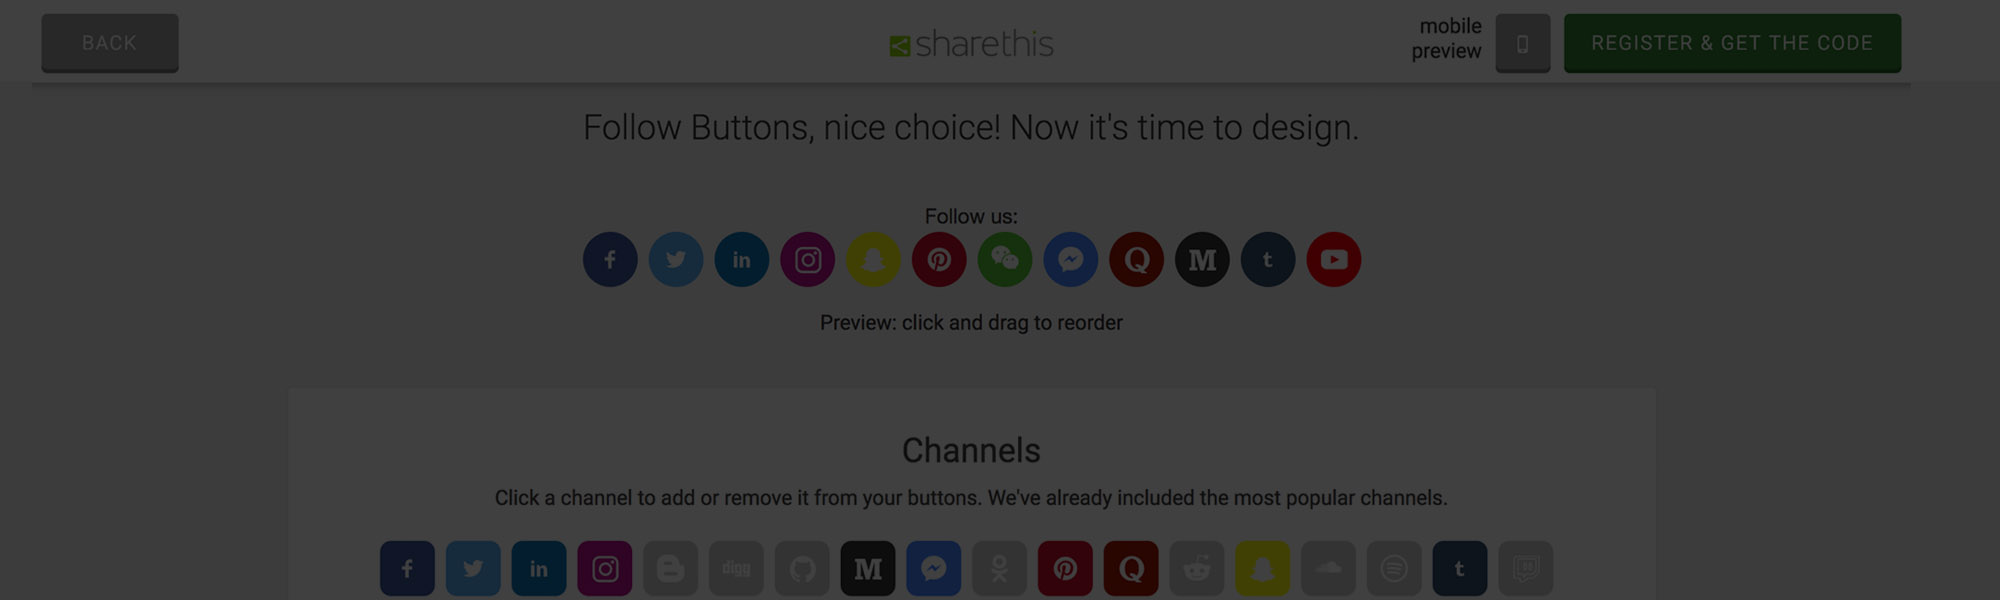 Introducing ShareThis follow buttons: Beautiful, quick to install, and easy to configure